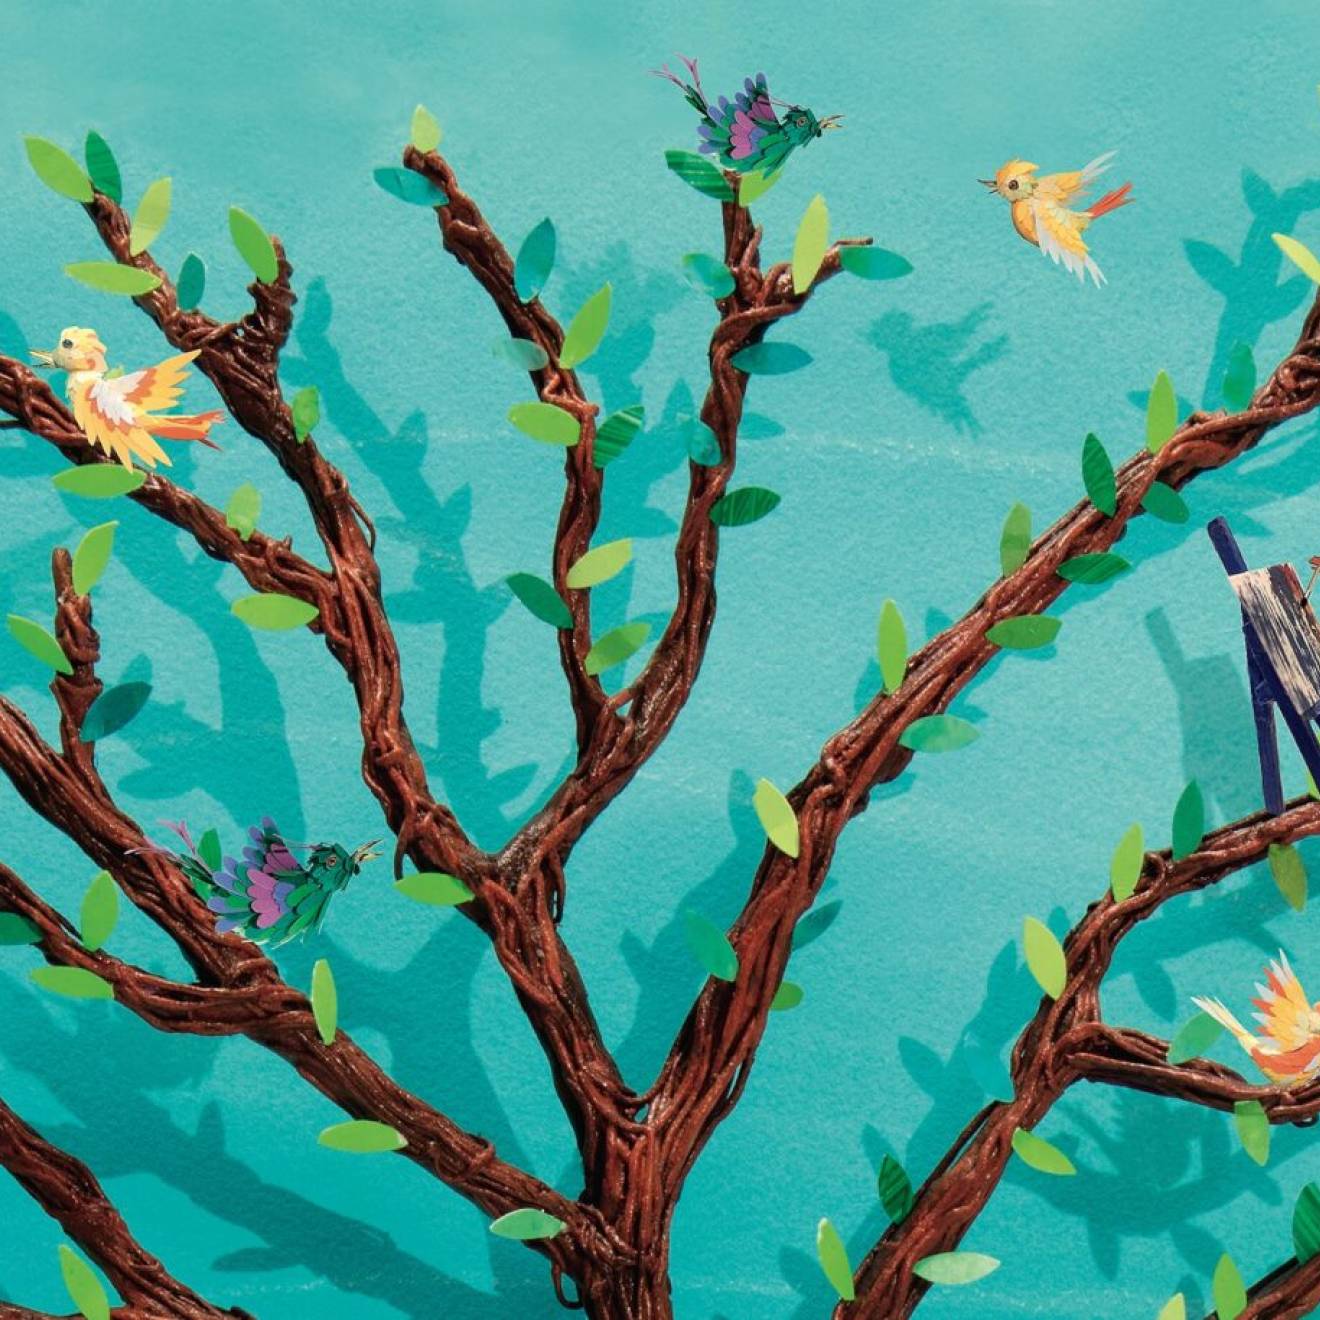 Illustration of a brown tree against a turquoise background, with tiny people and birds on its branches